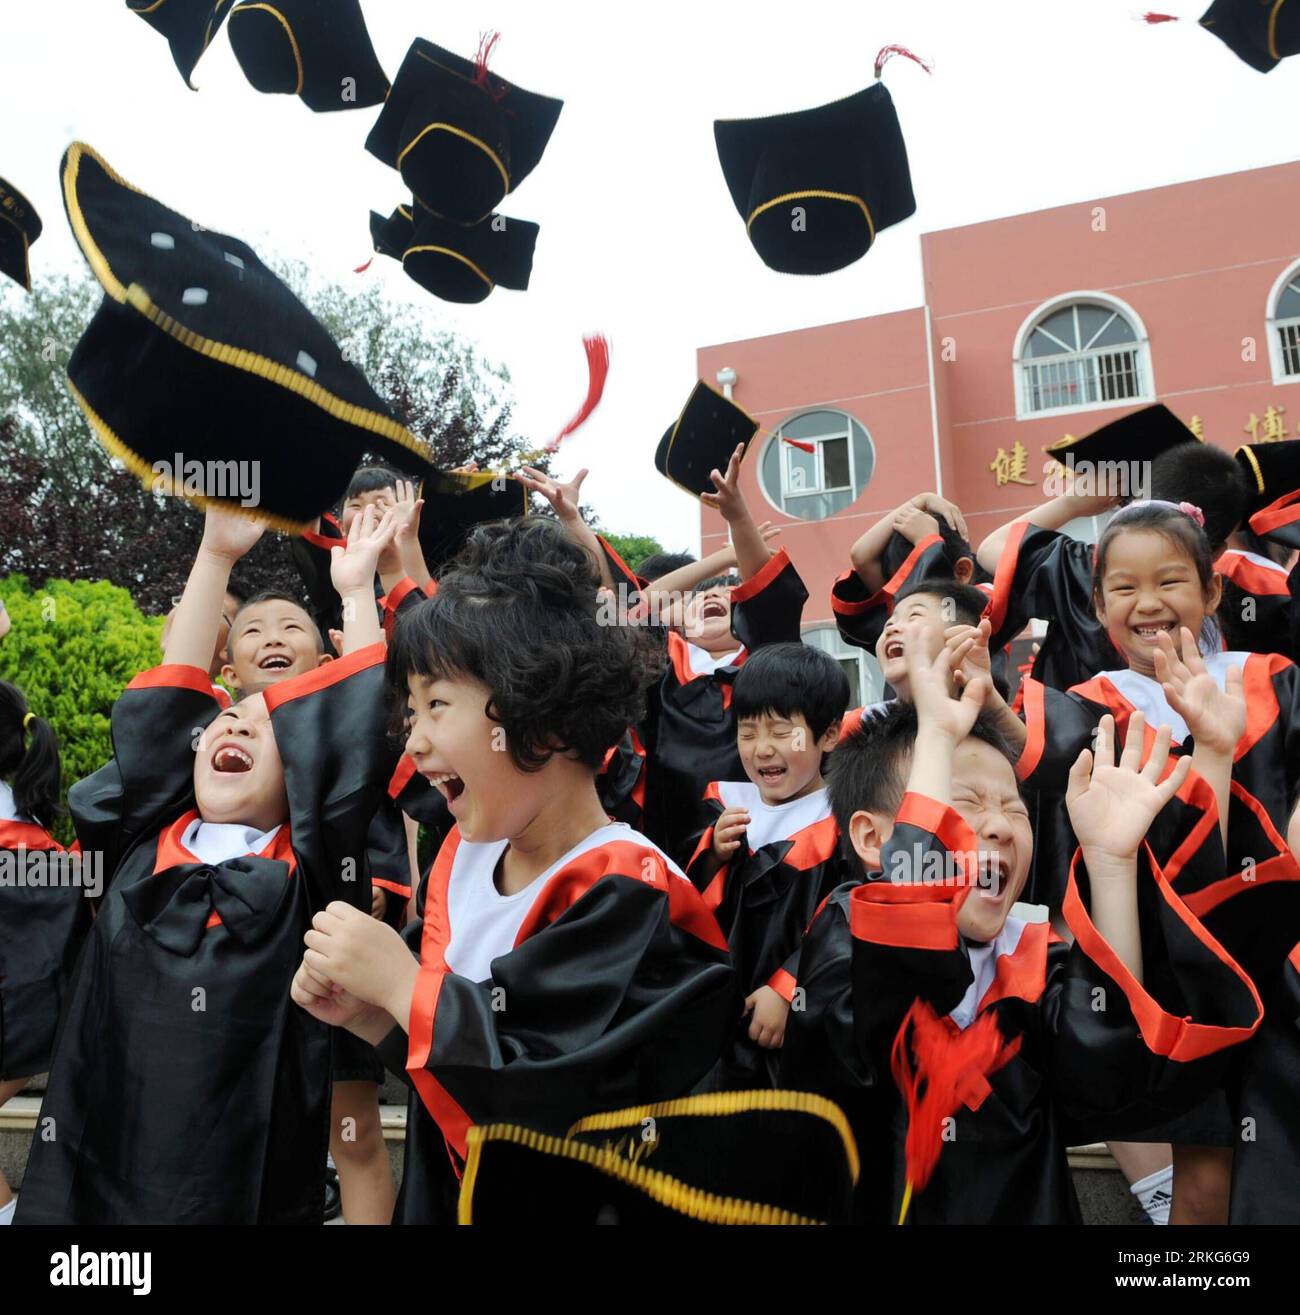 Bildnummer: 55555836  Datum: 29.06.2011  Copyright: imago/Xinhua (110629) -- QINGDAO, June 29, 2011 (Xinhua) -- Children who graduate from Jinyaoshi kindergarten in Qingdao of east China s Shandong Province celebrate on the graduation ceremony on June 29, 2011. The kindergarten held a graduation ceremony for children who graduated from it. More than 160 children attended the ceremony with their new gowns and caps, getting their first graduation certificate in life. (Xinhua/Li Ziheng) (nxn) CHINA-SHANDONG-QINGDAO-GRADUATION OF KINDERGARTEN (CN) PUBLICATIONxNOTxINxCHN Gesellschaft Bildung Kinder Stock Photo